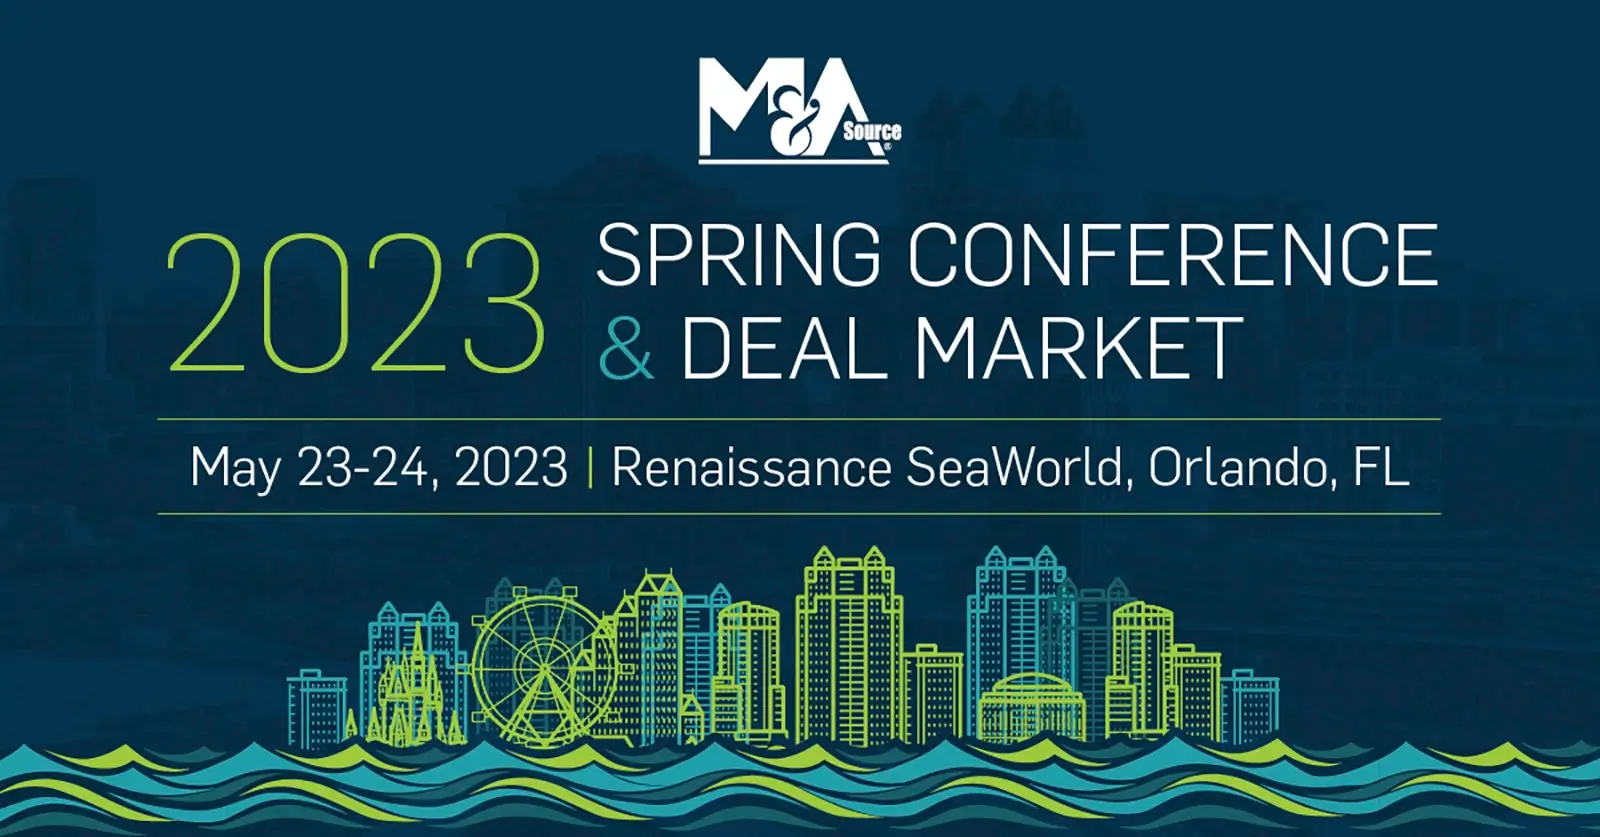 spring 2023 M&A Source conference branding